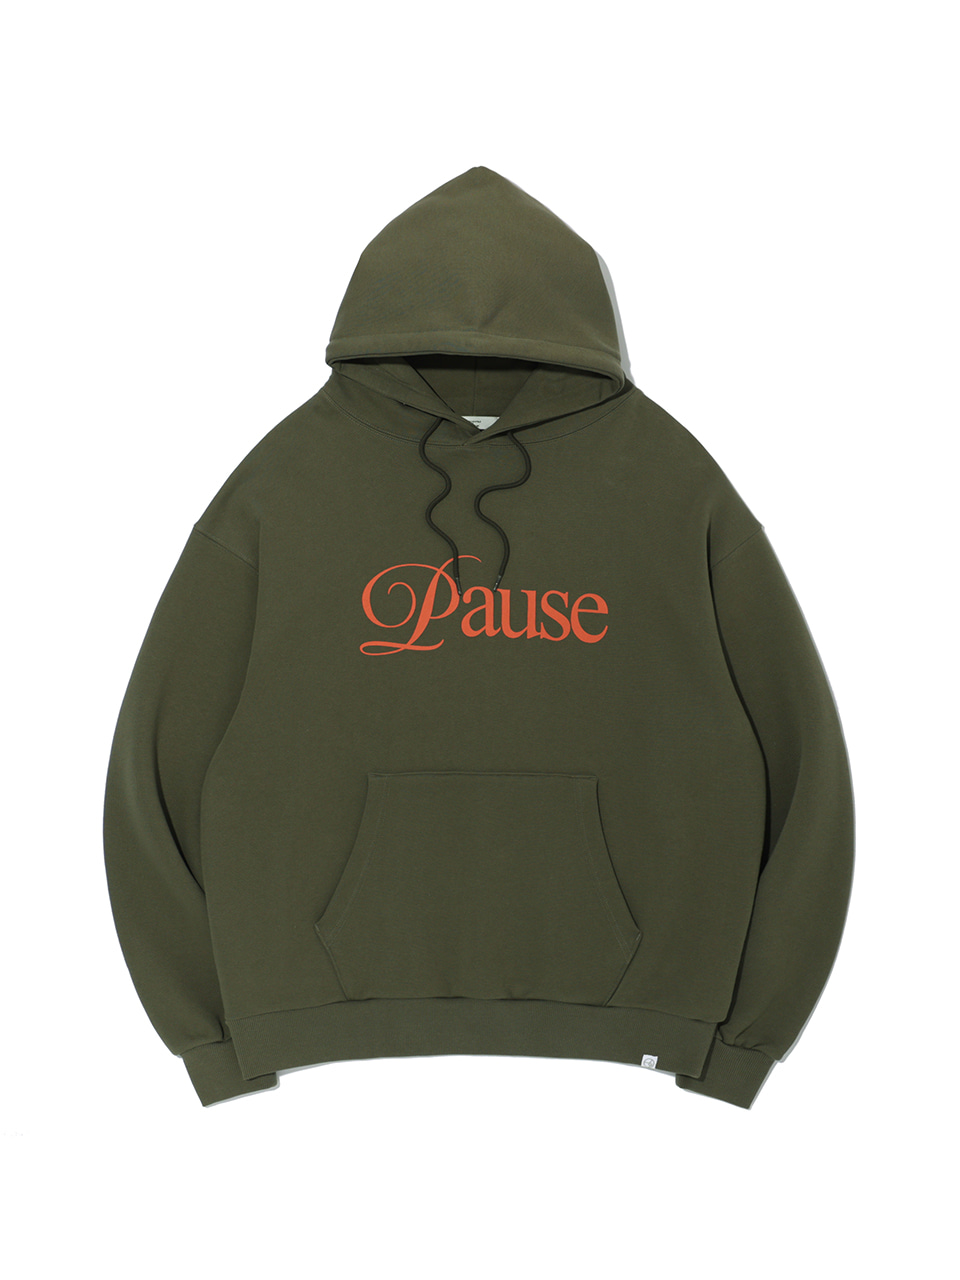 SOUNDSLIFE - P.P.R Lettering Hoodie Pullover Khaki